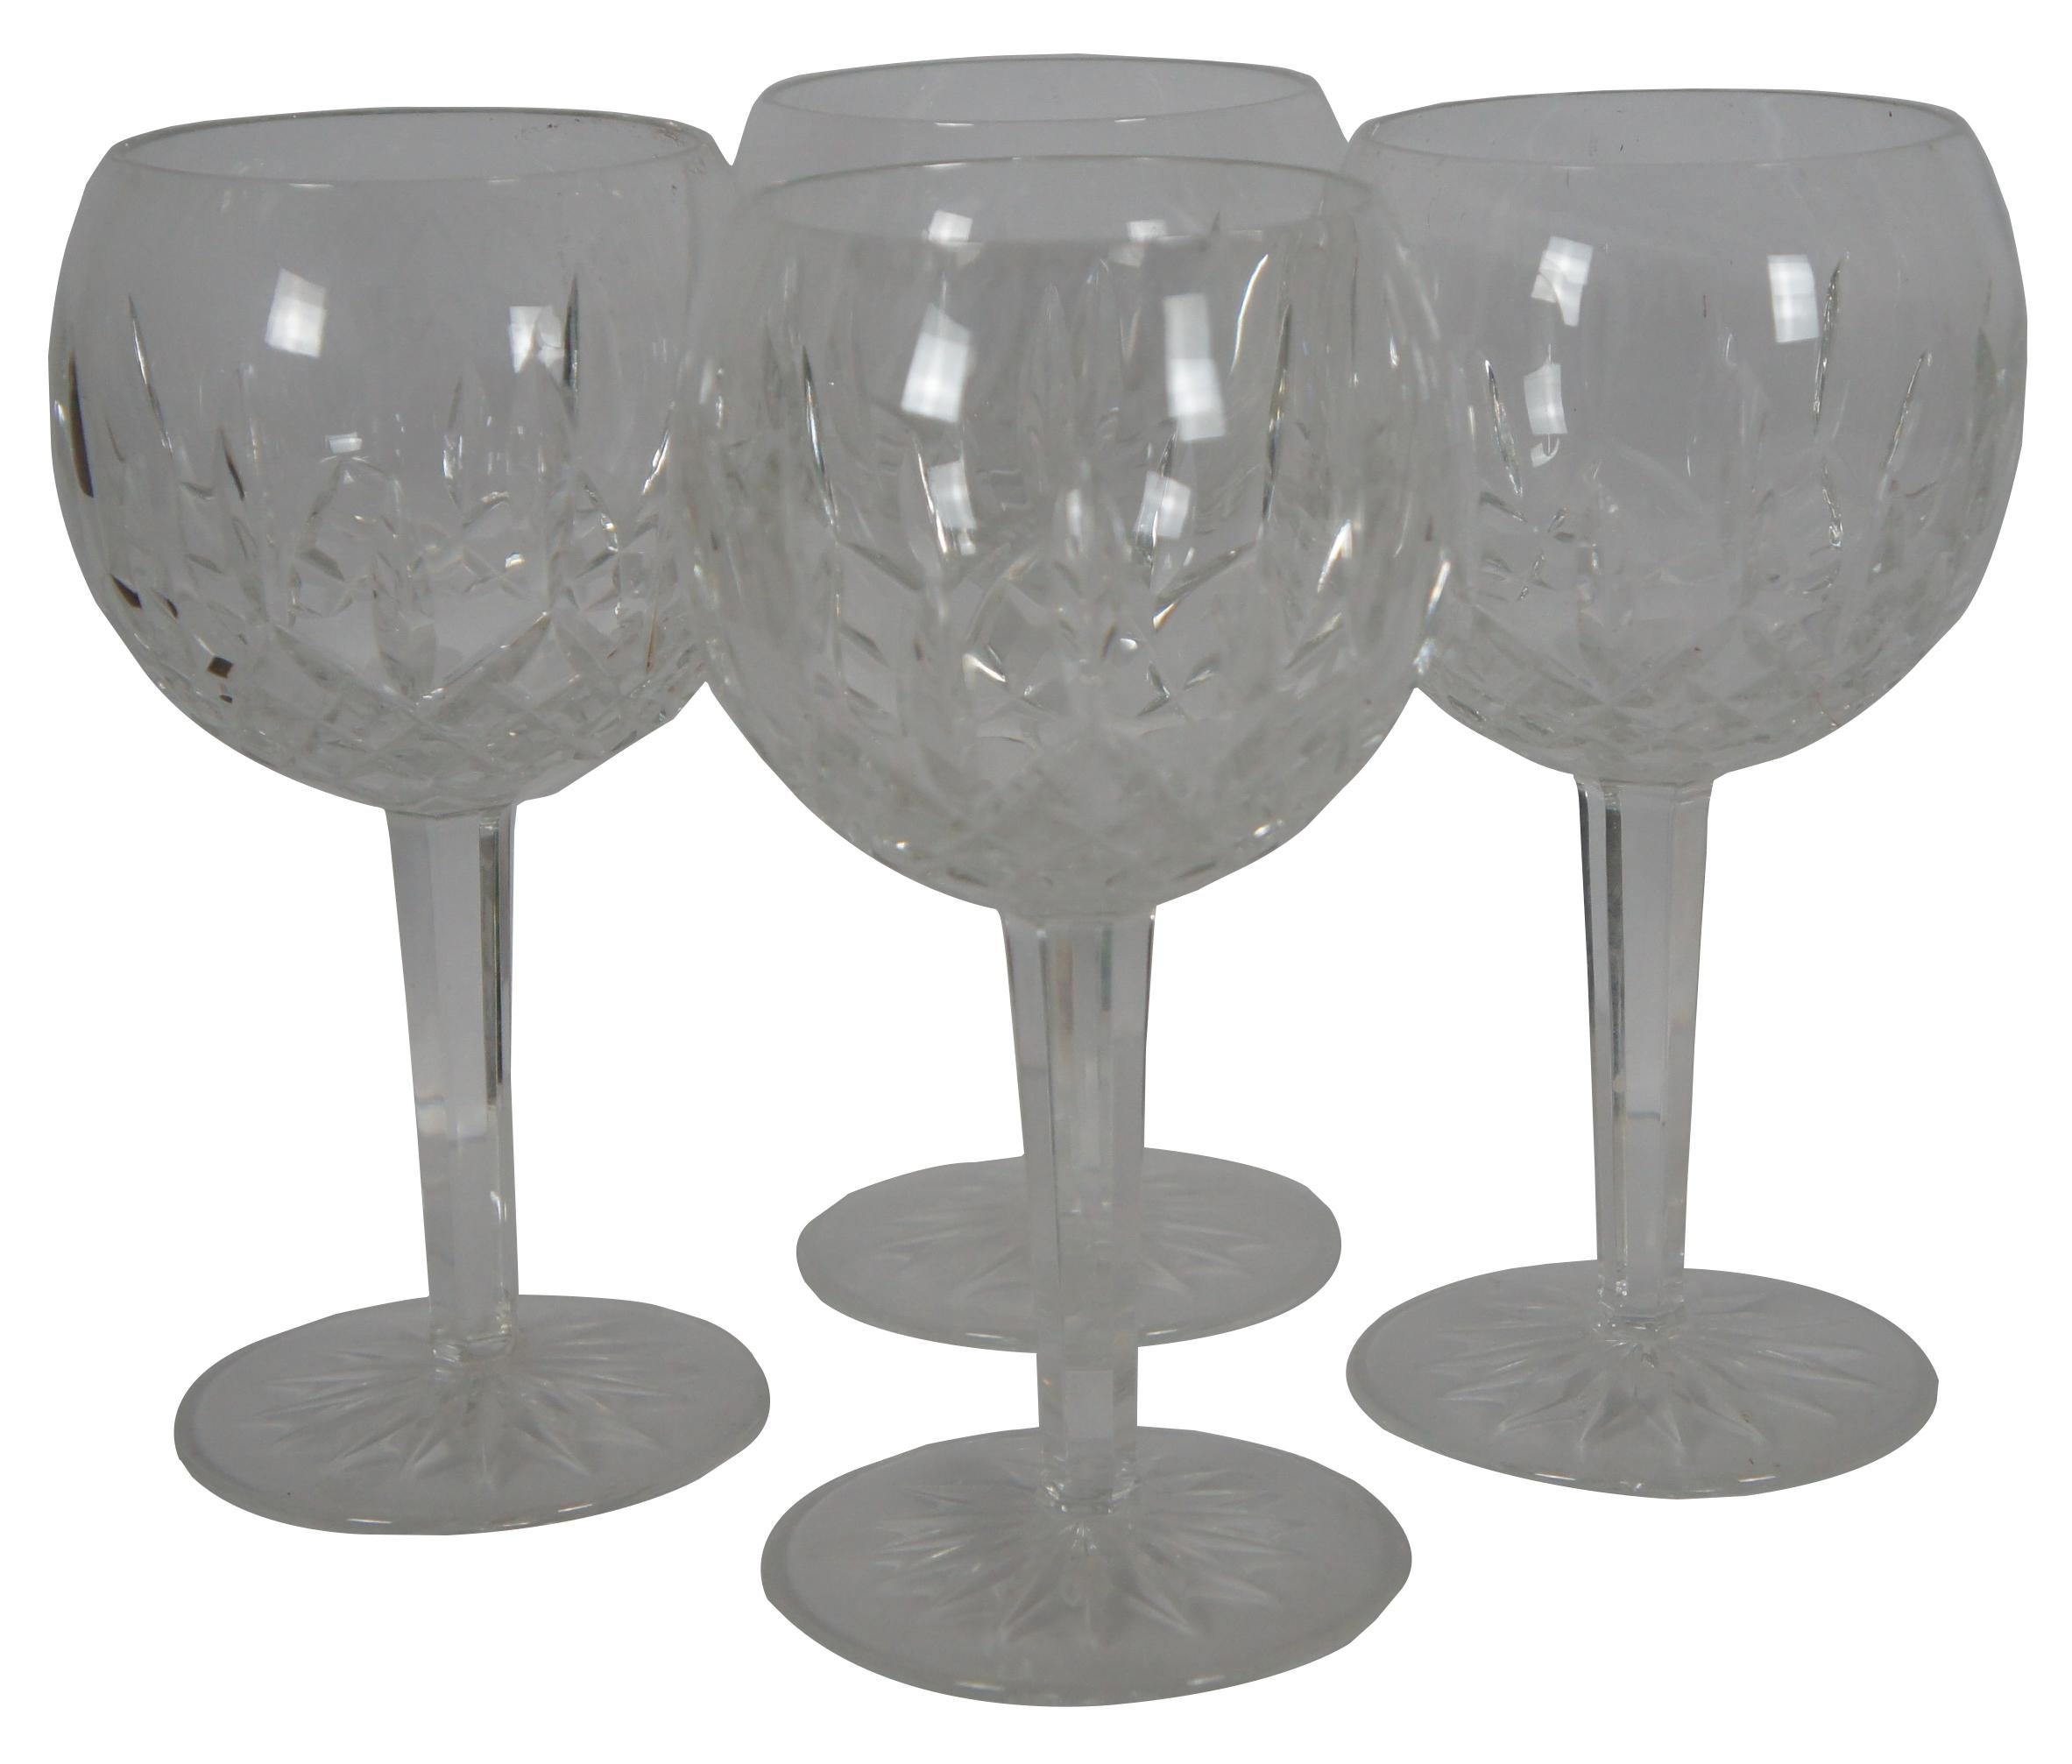 Set of four vintage Waterford Irish crystal oversize wine goblets in the Lismore pattern. Measure: 8